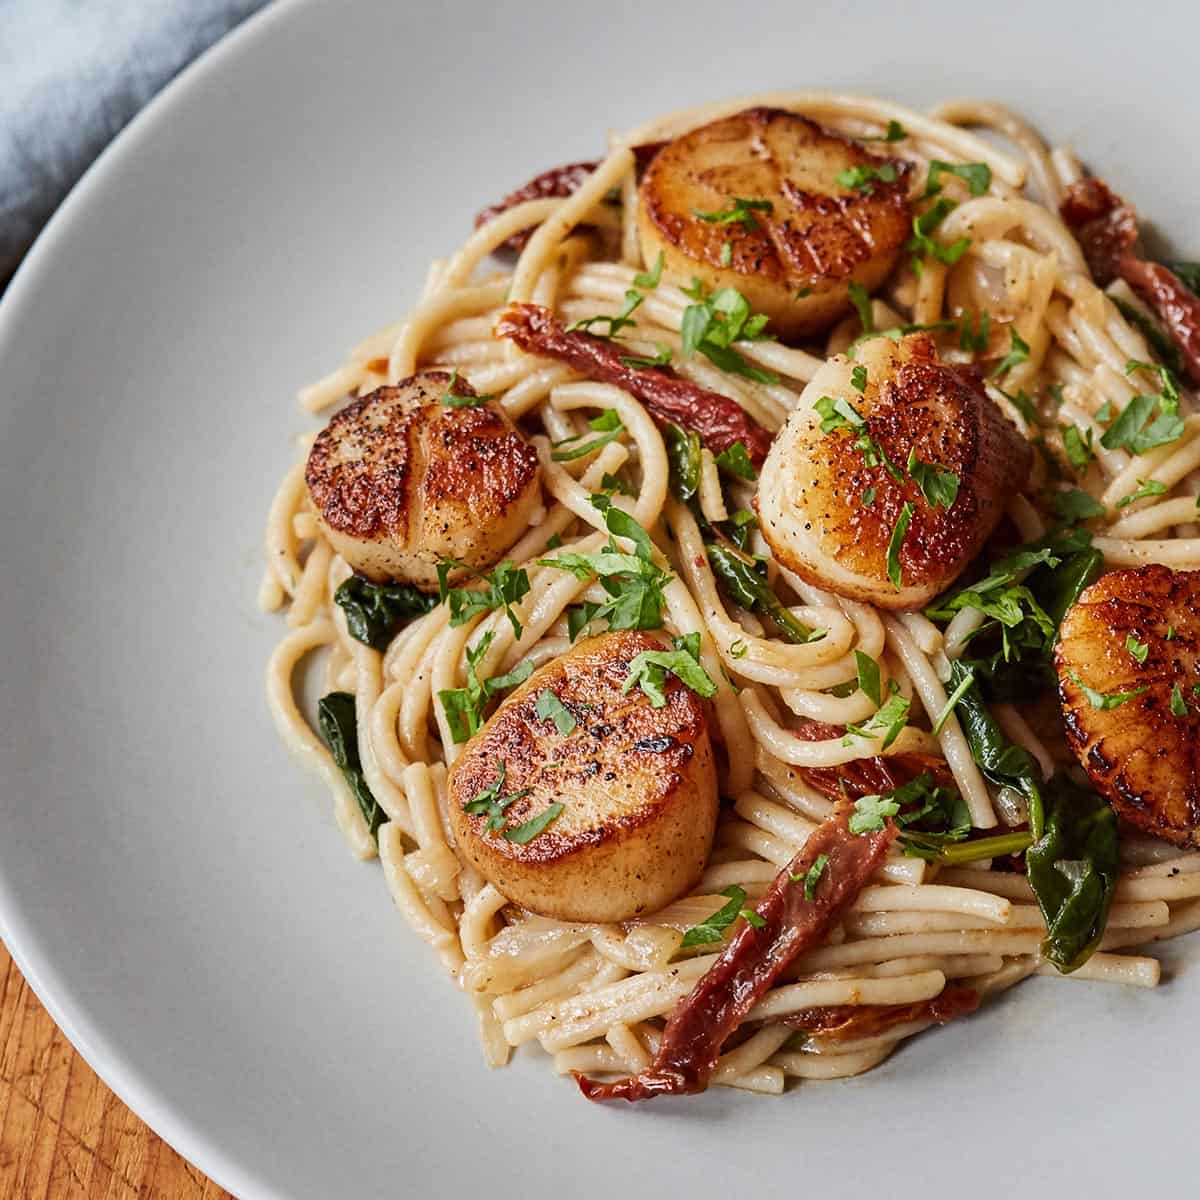 Tuscan Spaghetti with Scallops served on a light gray plate on wooden surface